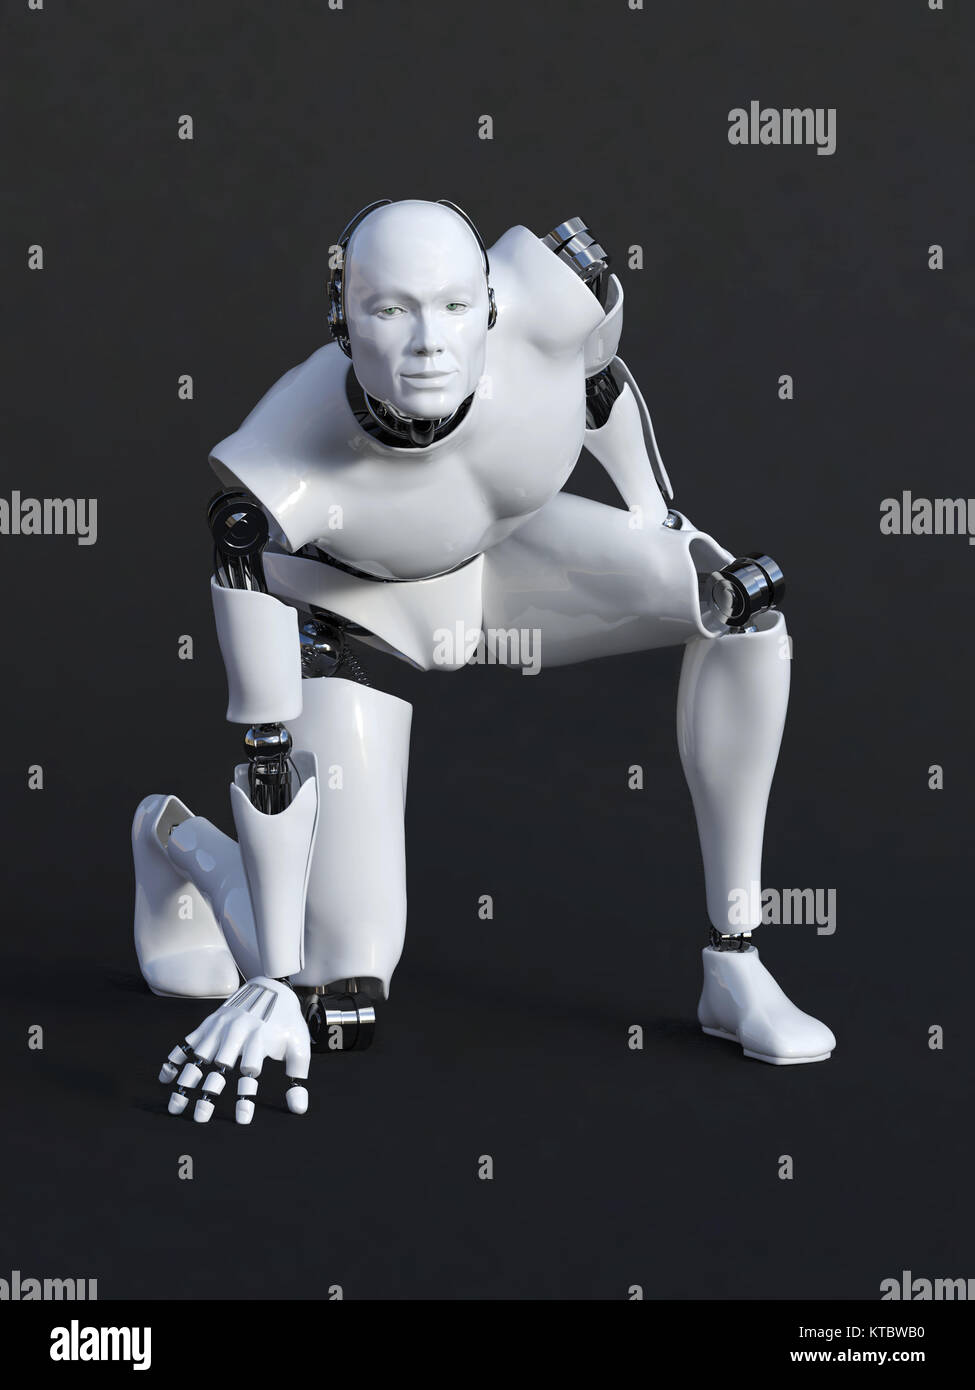 3D rendering of male robot crouching. Stock Photo